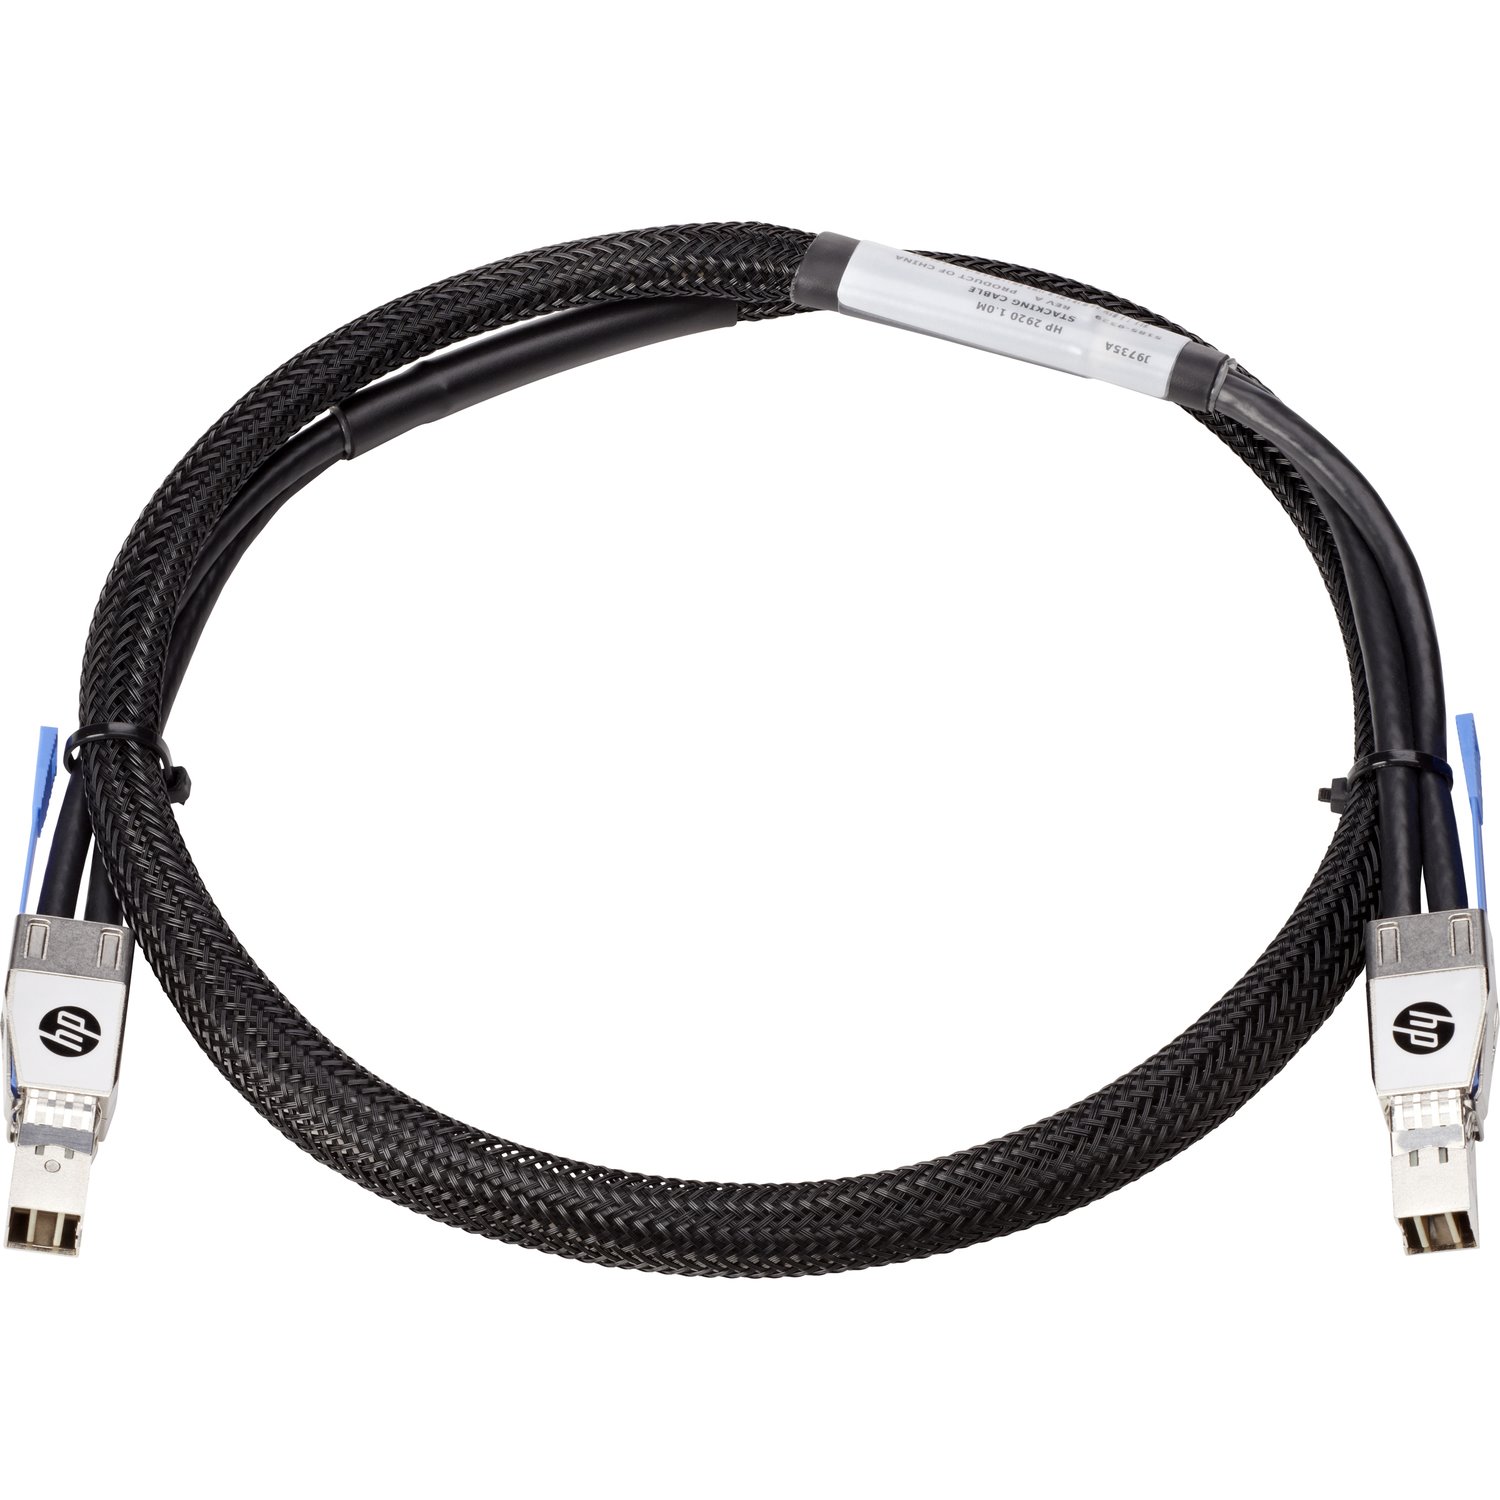 HPE 50 cm Network Cable for Network Device, Printer